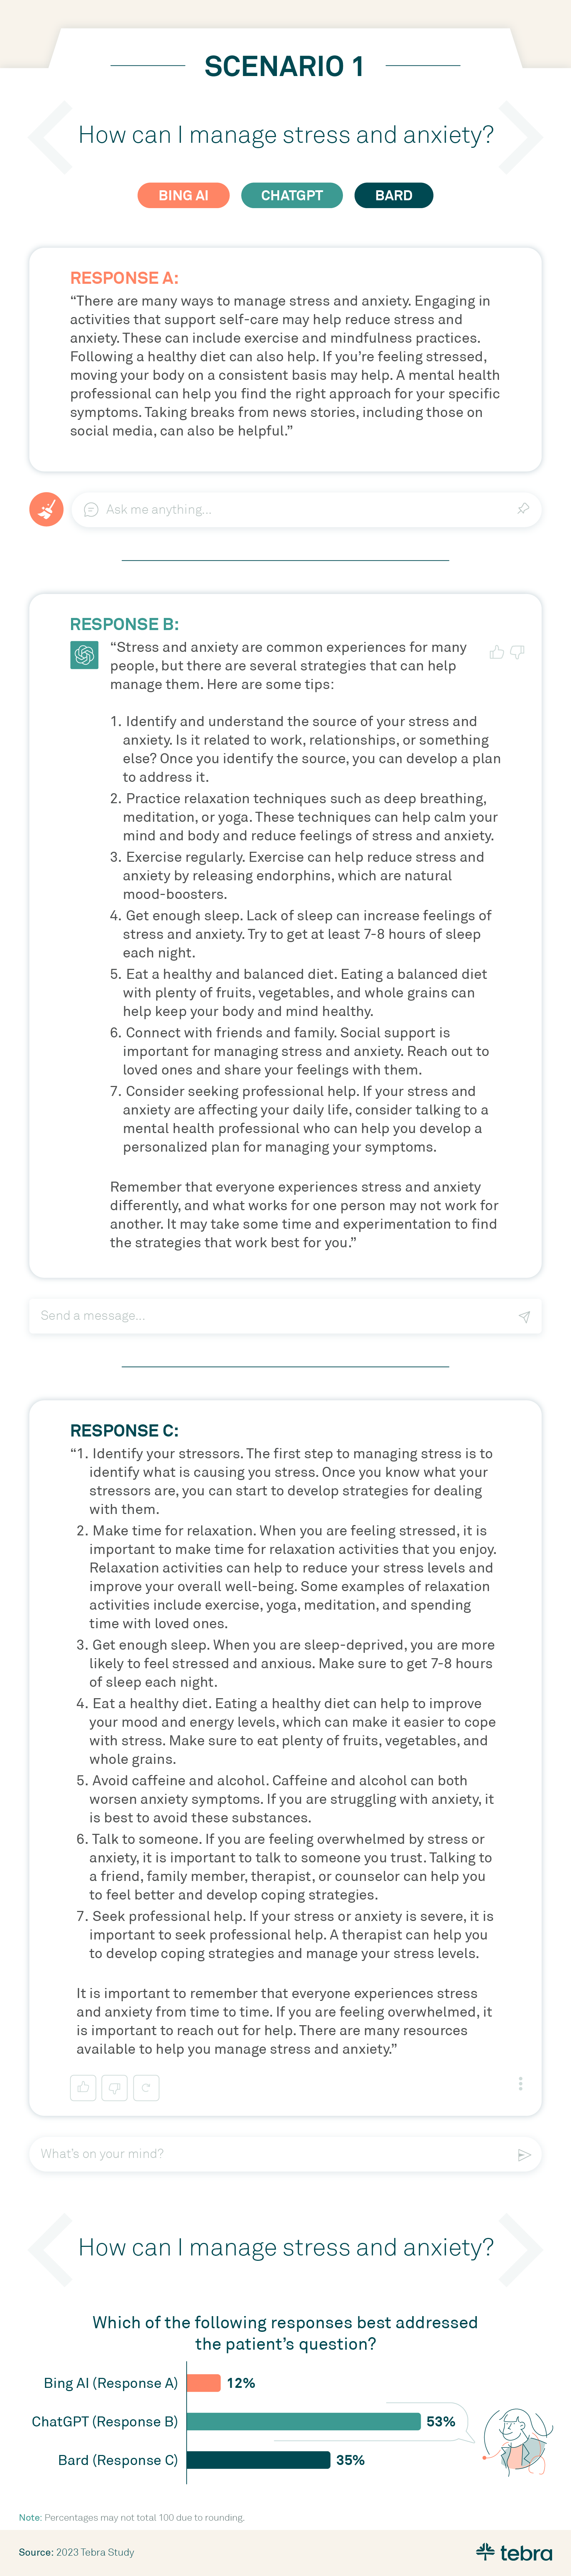 This is an infographic about Tebra research around the topic of AI in healthcare. This graphic features responses from Bing AI, ChatGPT, and Bard around the question "How can I manage stress and anxiety?". Bing's response is: “There are many ways to manage stress and anxiety. Engaging in activities that support self-care may help reduce stress and anxiety. These can include exercise and mindfulness practices. Following a healthy diet can also help. If you’re feeling stressed, moving your body on a consistent basis may help. A mental health professional can help you find the right approach for your specific symptoms. Taking breaks from news stories, including those on social media, can also be helpful." ChatGPT's response is "“Stress and anxiety are common experiences for many people, but there are several strategies that can help manage them. Here are some tips: Identify and understand the source of your stress and anxiety. Is it related to work, relationships, or something else? Once you identify the source, you can develop a plan to address it. Practice relaxation techniques such as deep breathing, meditation, or yoga. These techniques can help calm your mind and body and reduce feelings of stress and anxiety. Exercise regularly. Exercise can help reduce stress and anxiety by releasing endorphins, which are natural mood-boosters. Get enough sleep. Lack of sleep can increase feelings of stress and anxiety. Try to get at least 7-8 hours of sleep each night. Eat a healthy and balanced diet. Eating a balanced diet with plenty of fruits, vegetables, and whole grains can help keep your body and mind healthy. Connect with friends and family. Social support is important for managing stress and anxiety. Reach out to loved ones and share your feelings with them. Consider seeking professional help. If your stress and anxiety are affecting your daily life, consider talking to a mental health professional who can help you develop a personalized plan for managing your symptoms. Remember that everyone experiences stress and anxiety differently, and what works for one person may not work for another. It may take some time and experimentation to find the strategies that work best for you.” Google’s Bard response is " Identify your stressors. The first step to managing stress is to identify what is causing you stress. Once you know what your stressors are, you can start to develop strategies for dealing with them. Make time for relaxation. When you are feeling stressed, it is important to make time for relaxation activities that you enjoy. Relaxation activities can help to reduce your stress levels and improve your overall well-being. Some examples of relaxation activities include exercise, yoga, meditation, and spending time with loved ones. Get enough sleep. When you are sleep-deprived, you are more likely to feel stressed and anxious. Make sure to get 7-8 hours of sleep each night. Eat a healthy diet. Eating a healthy diet can help to improve your mood and energy levels, which can make it easier to cope with stress. Make sure to eat plenty of fruits, vegetables, and whole grains. Avoid caffeine and alcohol. Caffeine and alcohol can both worsen anxiety symptoms. If you are struggling with anxiety, it is best to avoid these substances. Talk to someone. If you are feeling overwhelmed by stress or anxiety, it is important to talk to someone you trust. Talking to a friend, family member, therapist, or counselor can help you to feel better and develop coping strategies. Seek professional help. If your stress or anxiety is severe, it is important to seek professional help. A therapist can help you to develop coping strategies and manage your stress levels. It is important to remember that everyone experiences stress and anxiety from time to time. If you are feeling overwhelmed, it is important to reach out for help. There are many resources available to help you manage stress and anxiety."